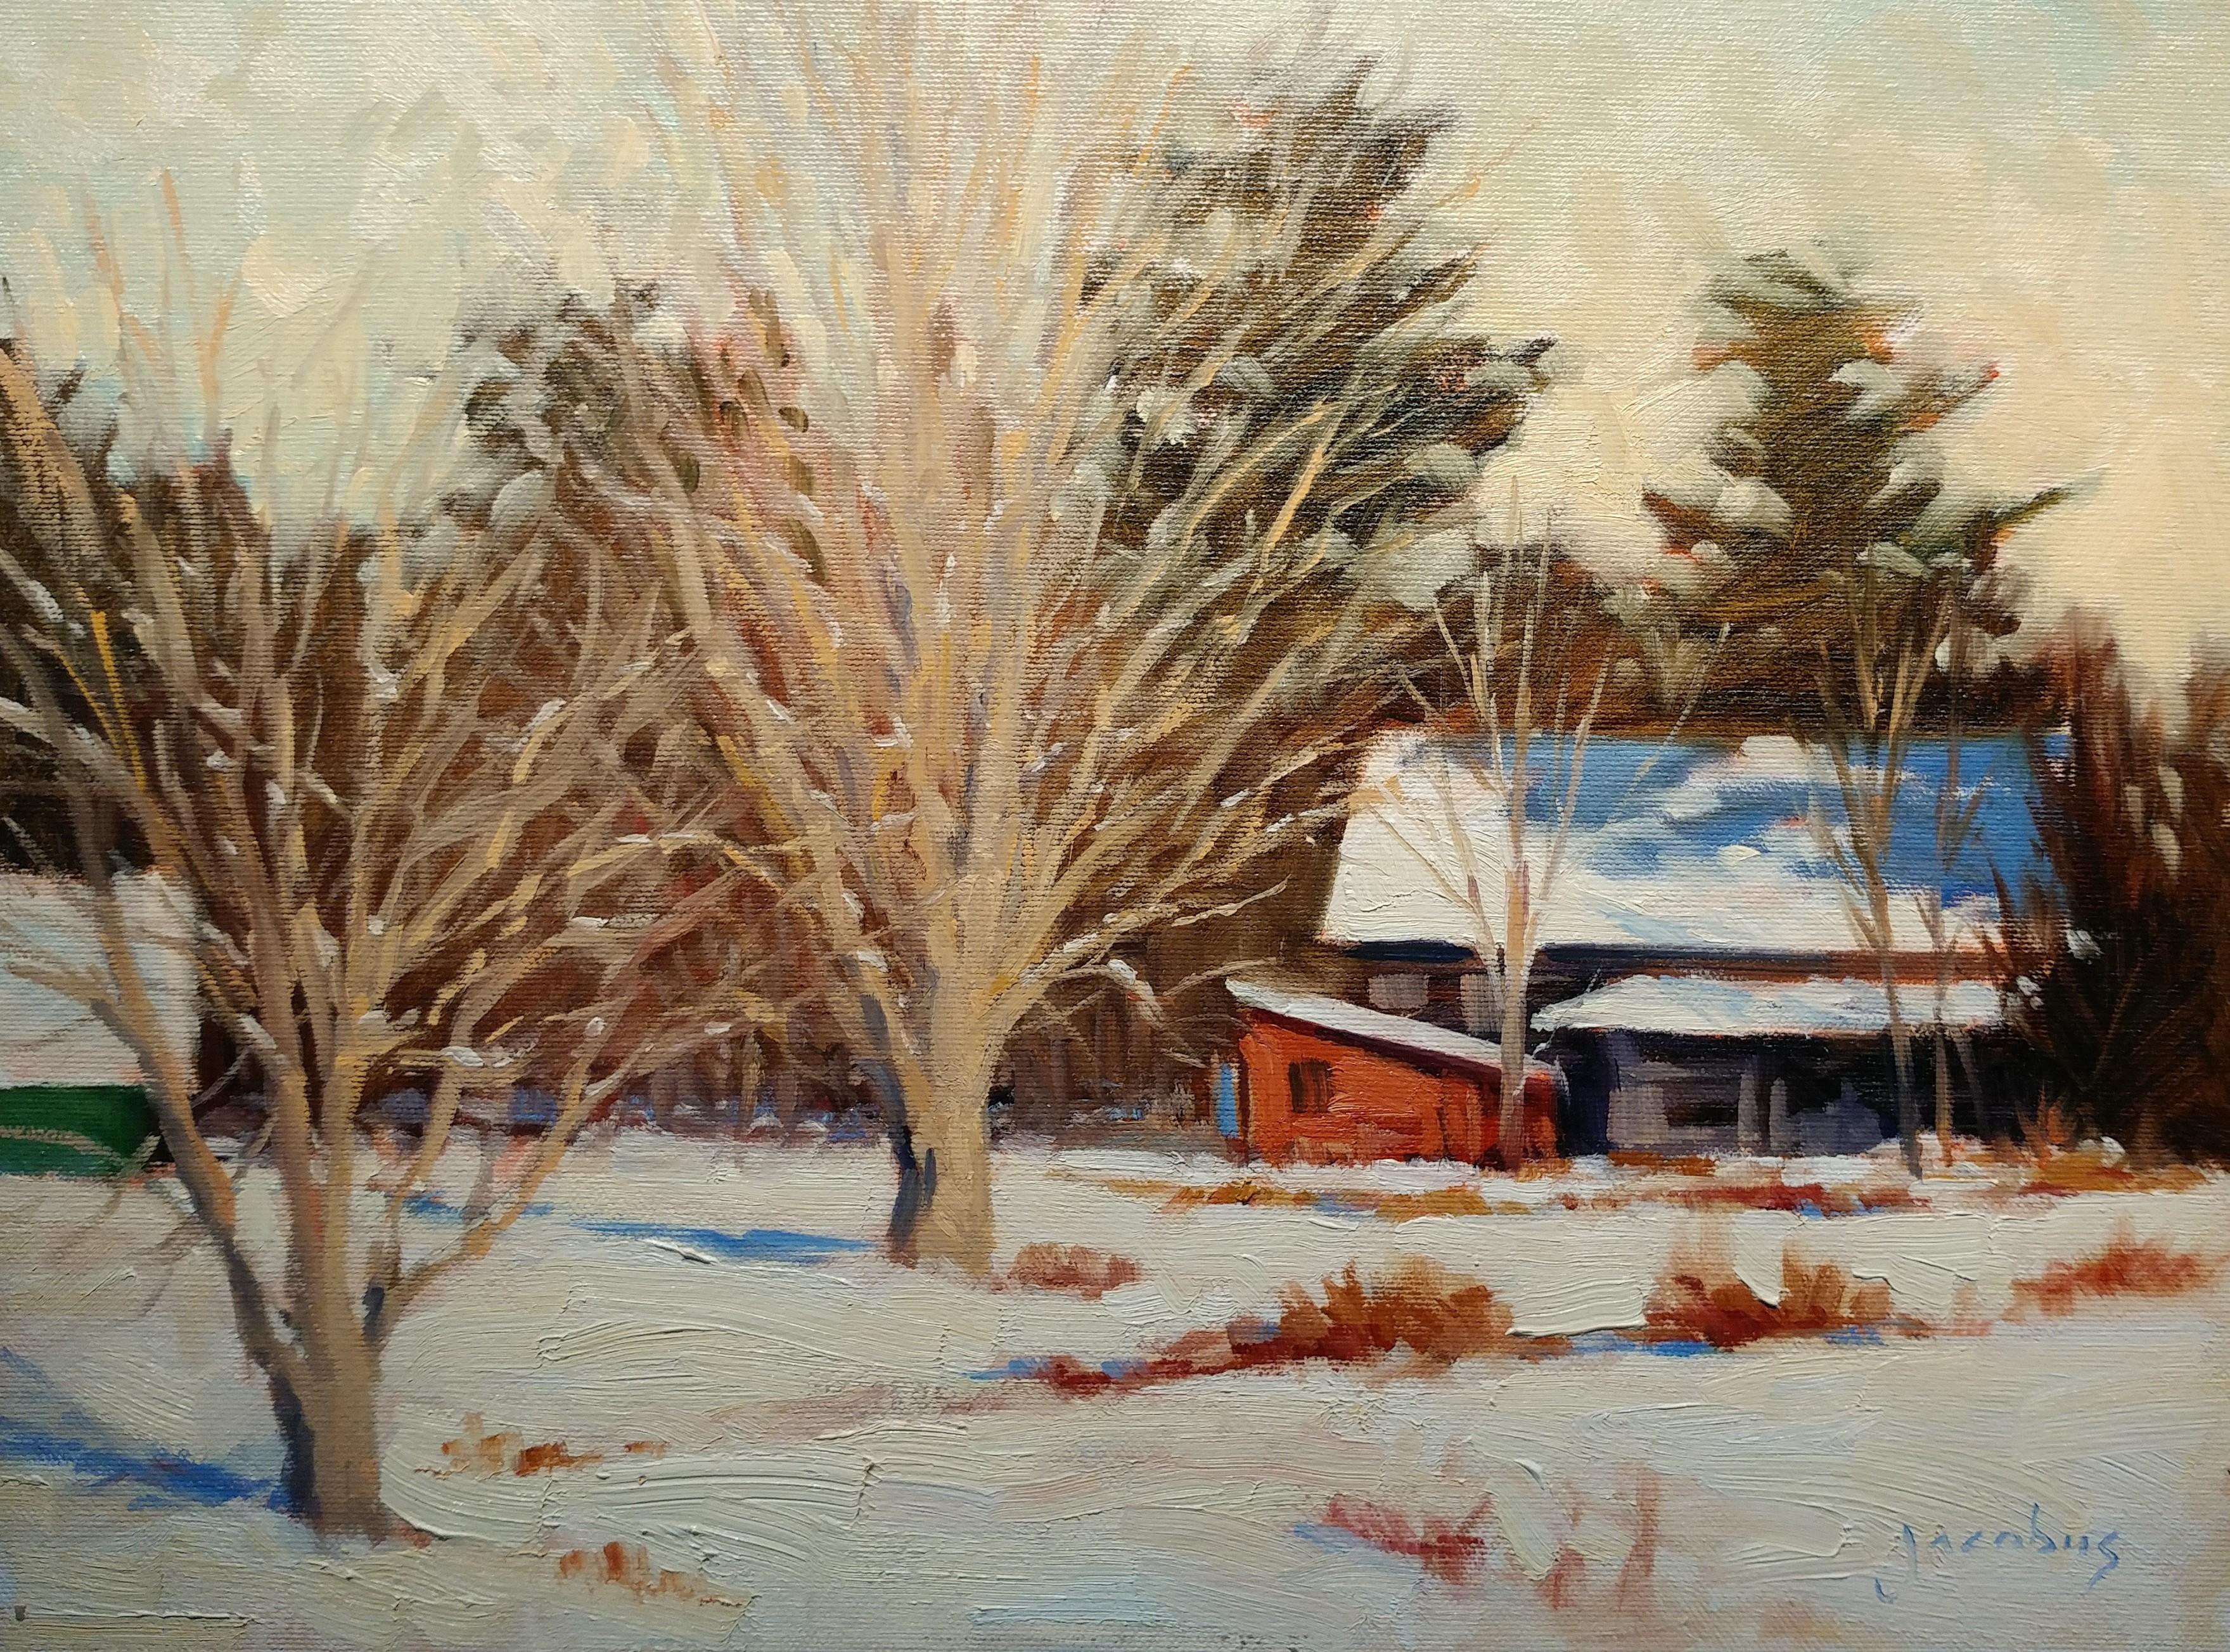 Jacobus Baas Landscape Painting - "Red Tool Shed" Maine Plein Air Oil Painting